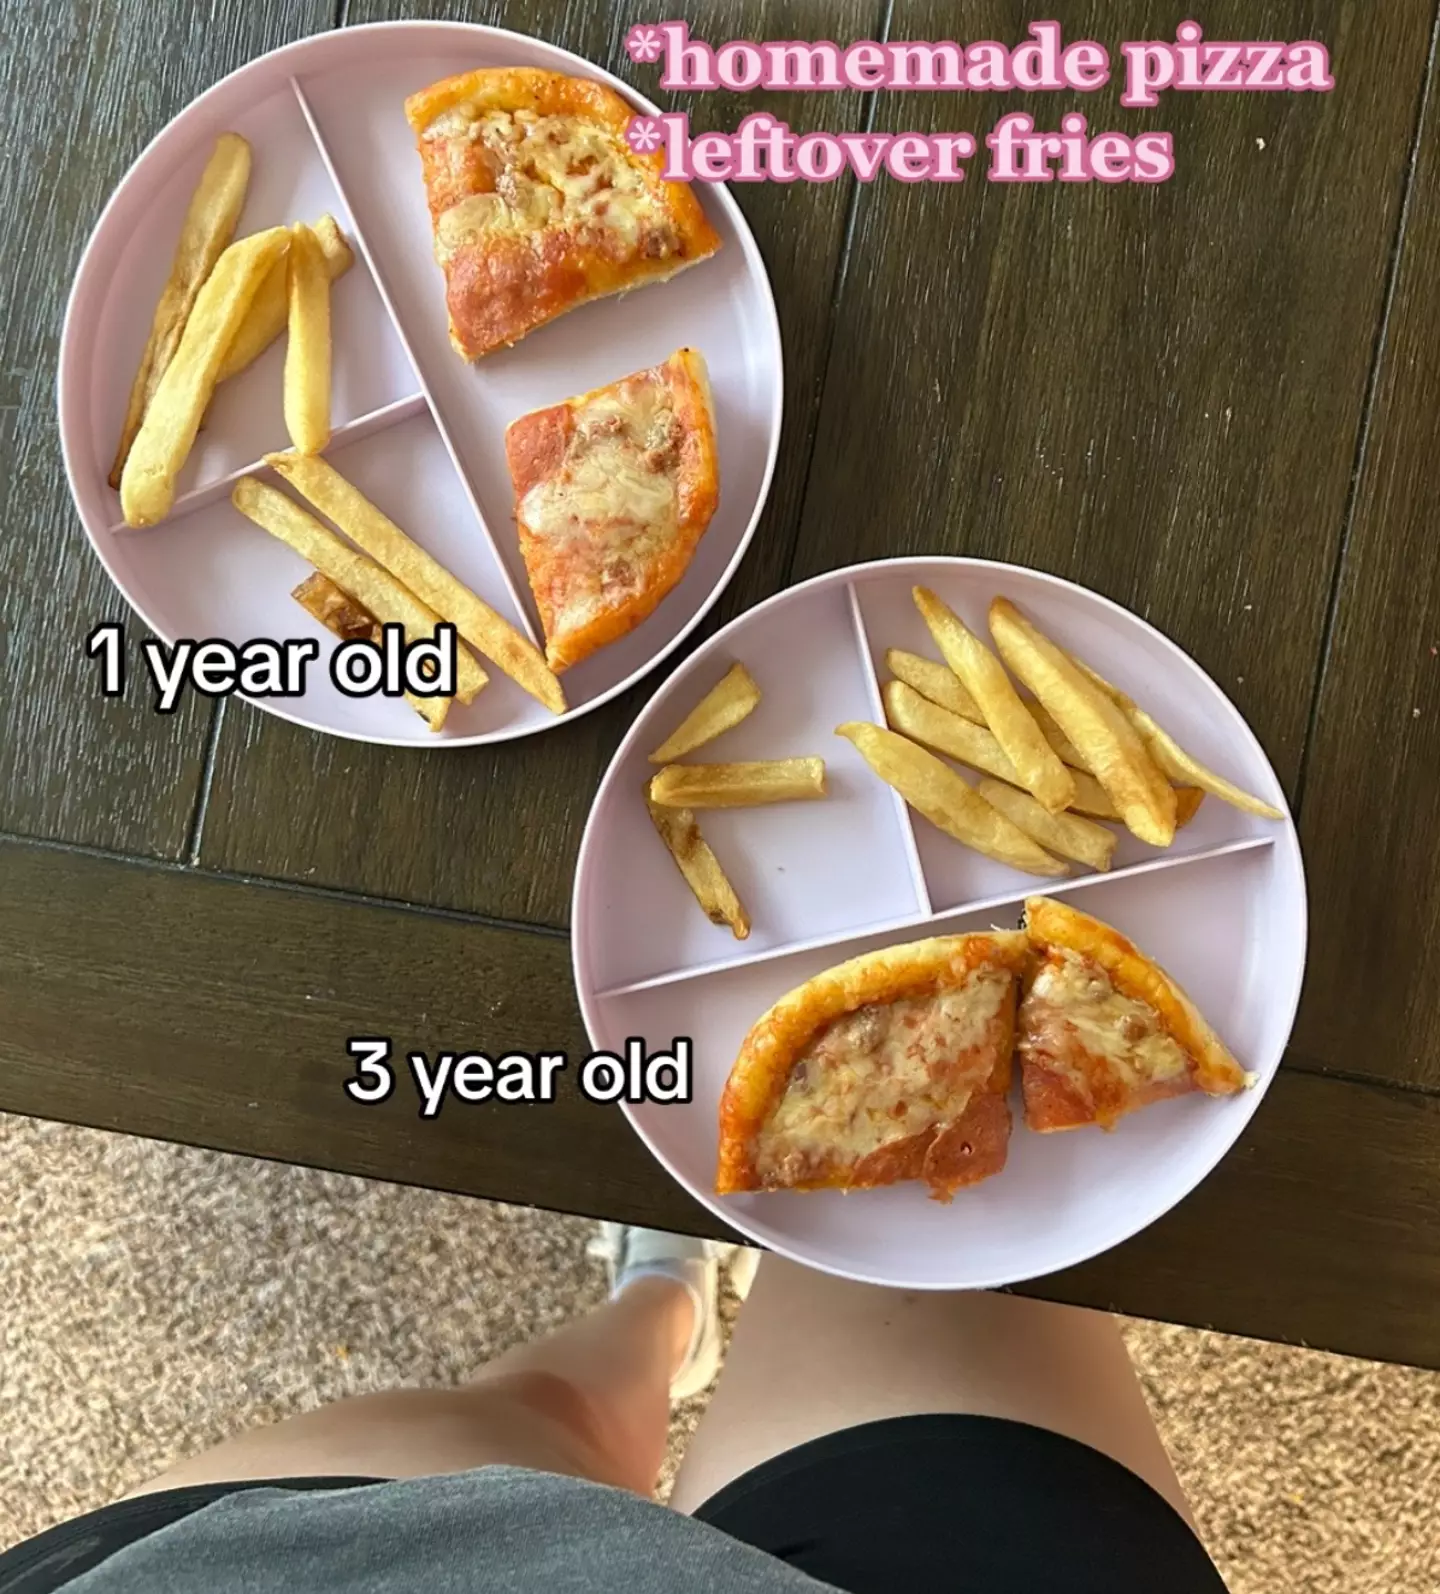 The kids had pizza and fries for lunch.